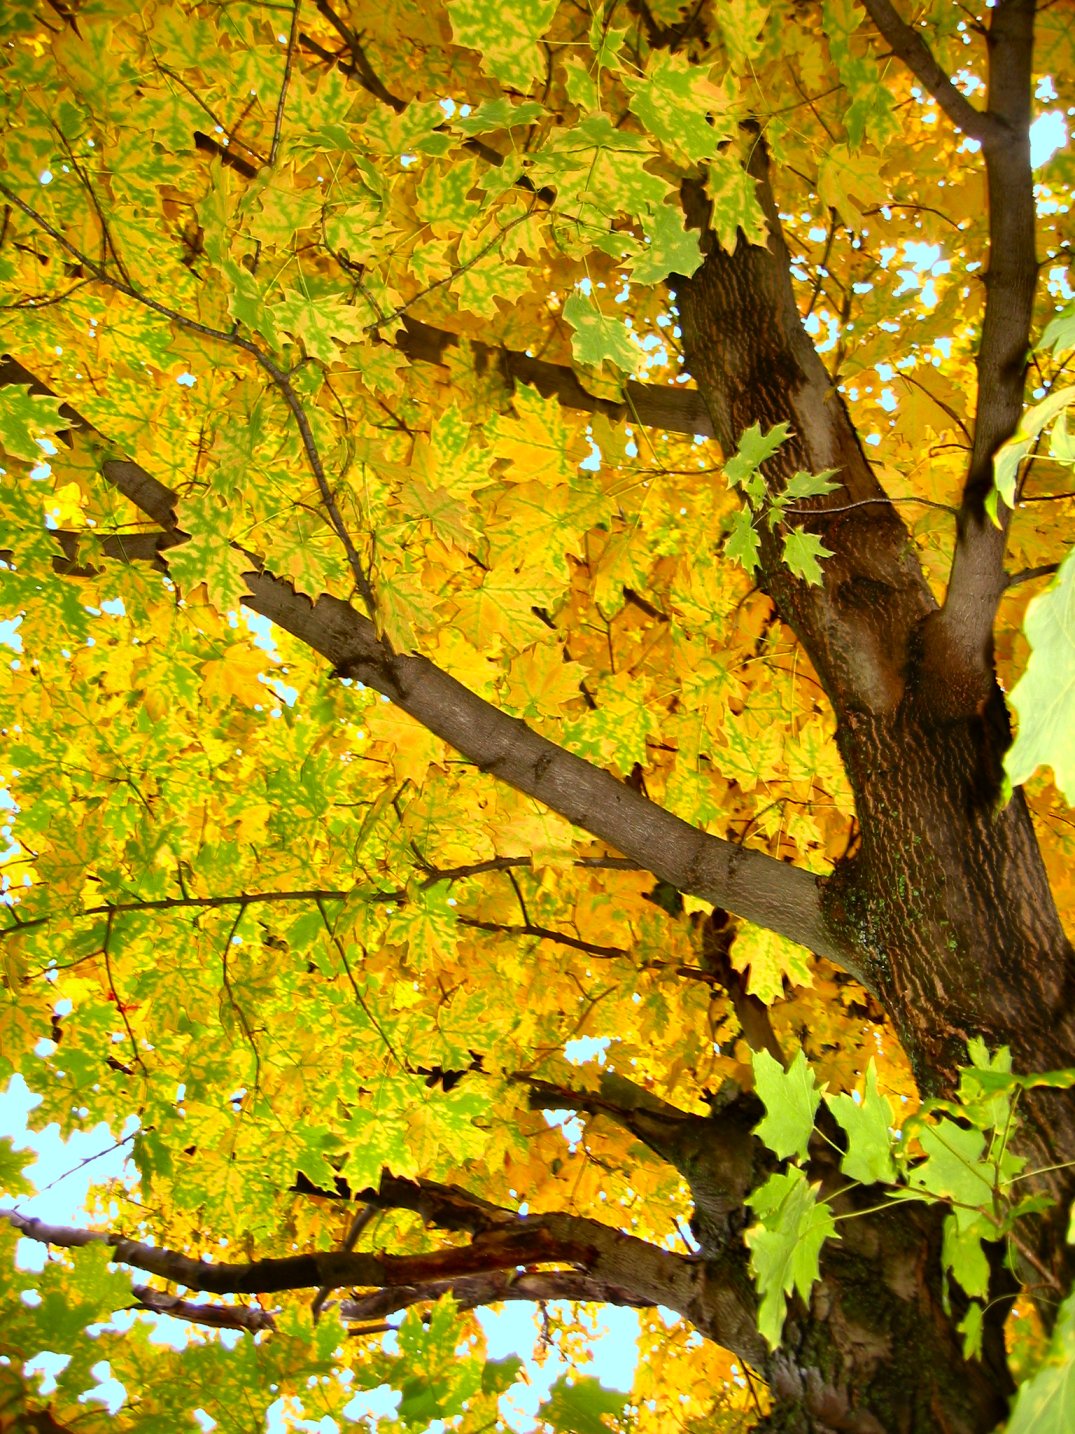 Soul Amp: Fall tree and leaf photos from Milwaukee, WI ...